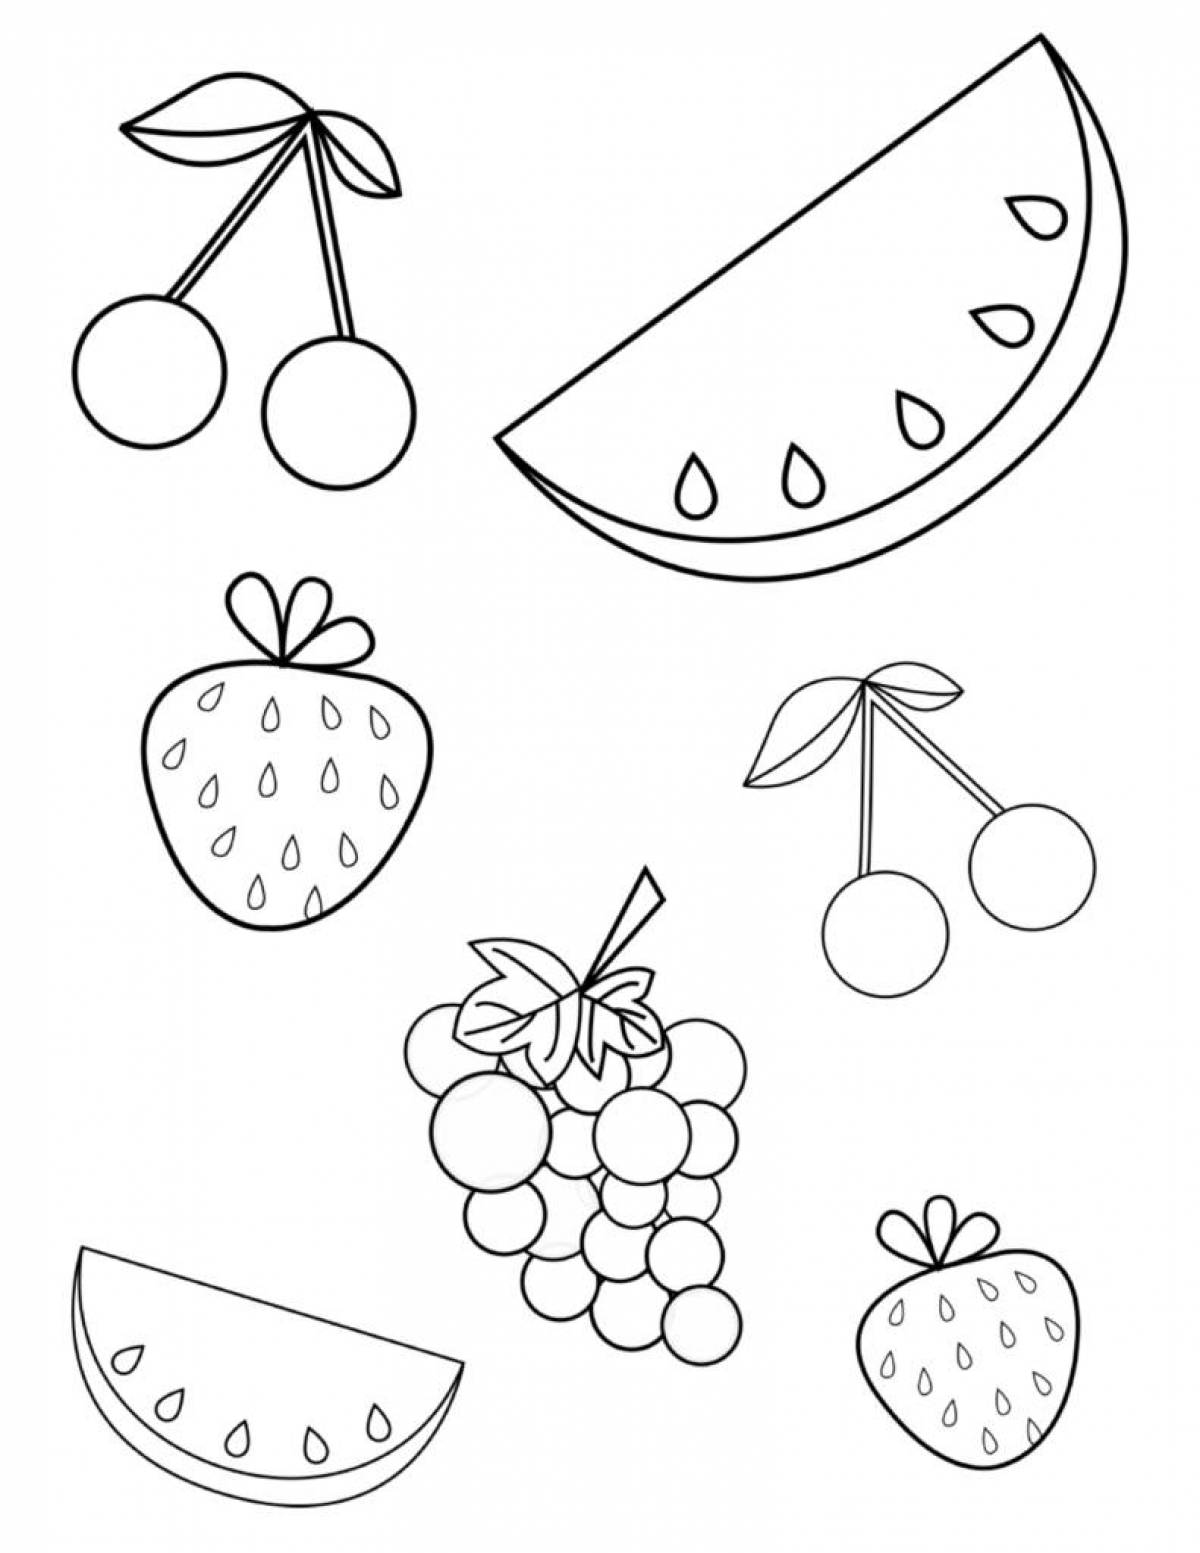 Exquisite fruit coloring book for 3-4 year olds